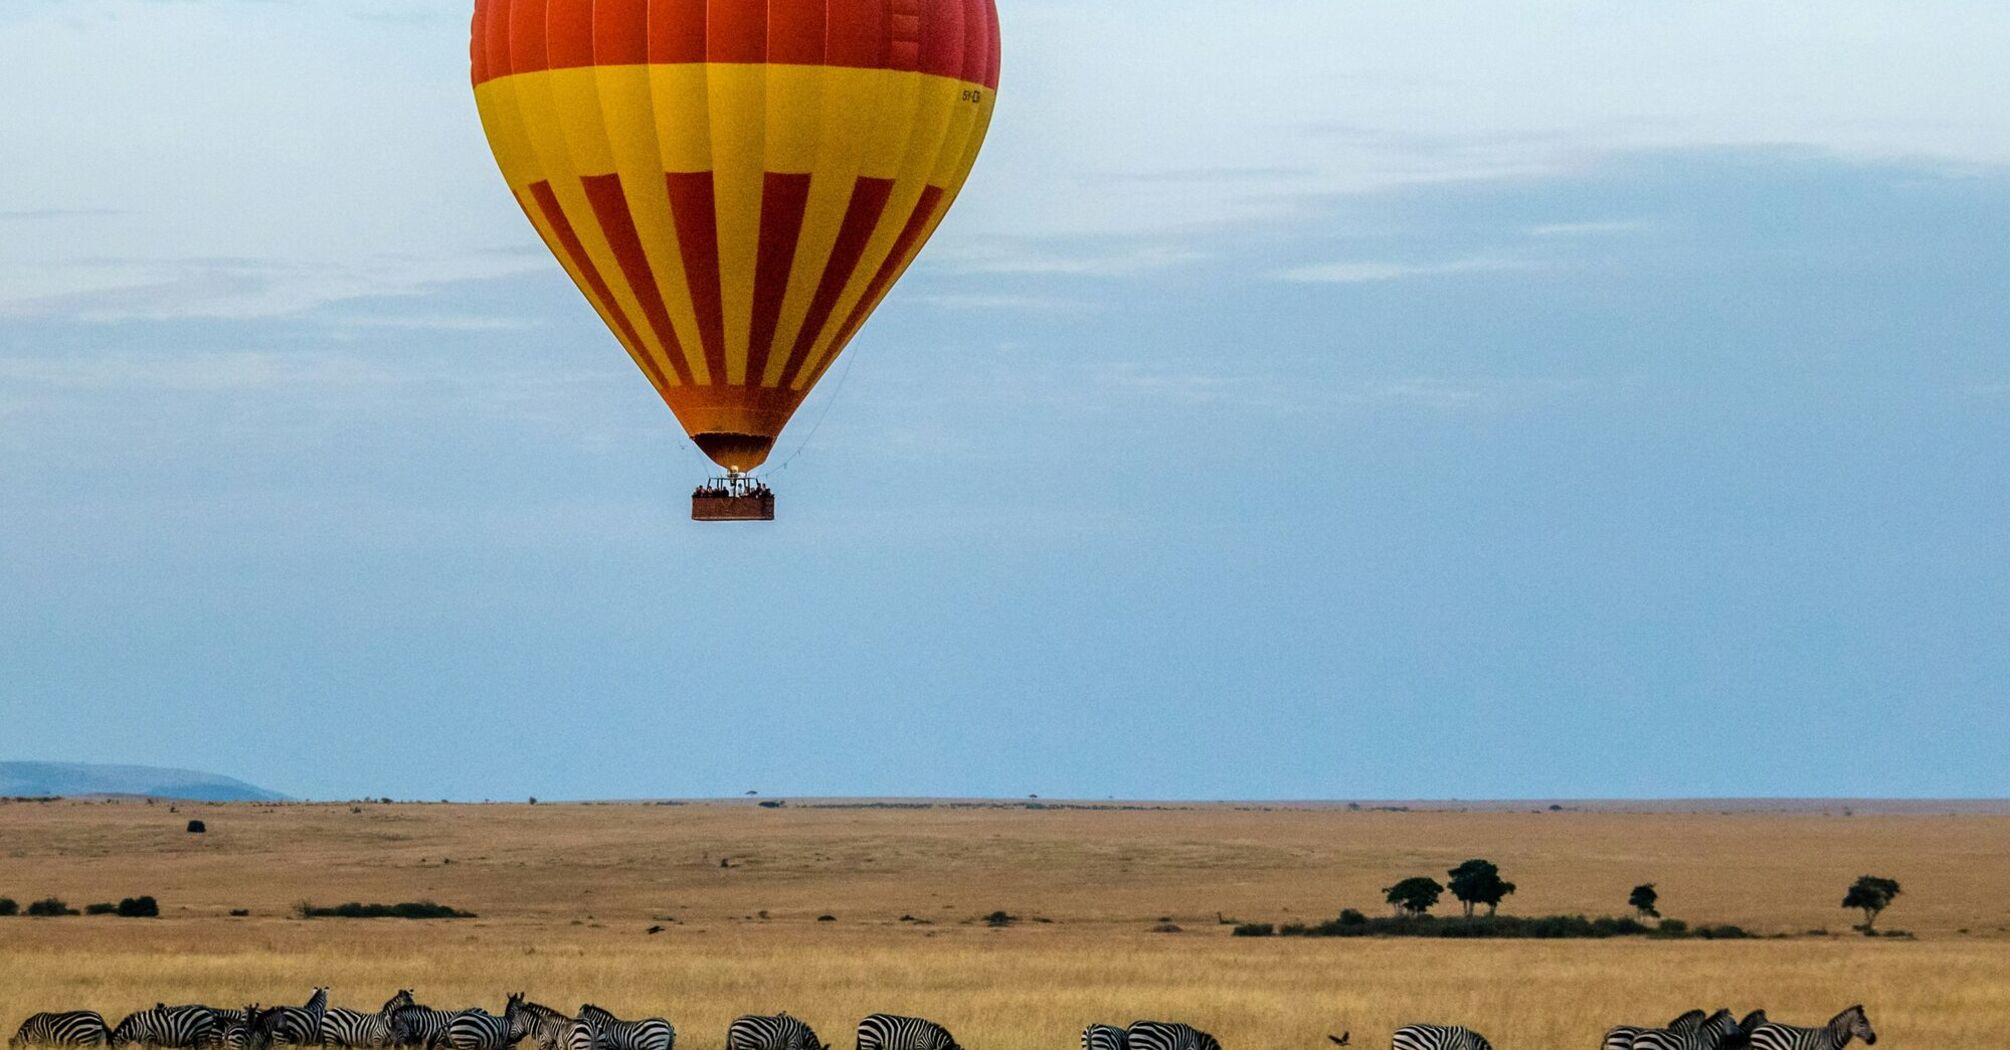 Red and yellow hot air balloon over field with zebras